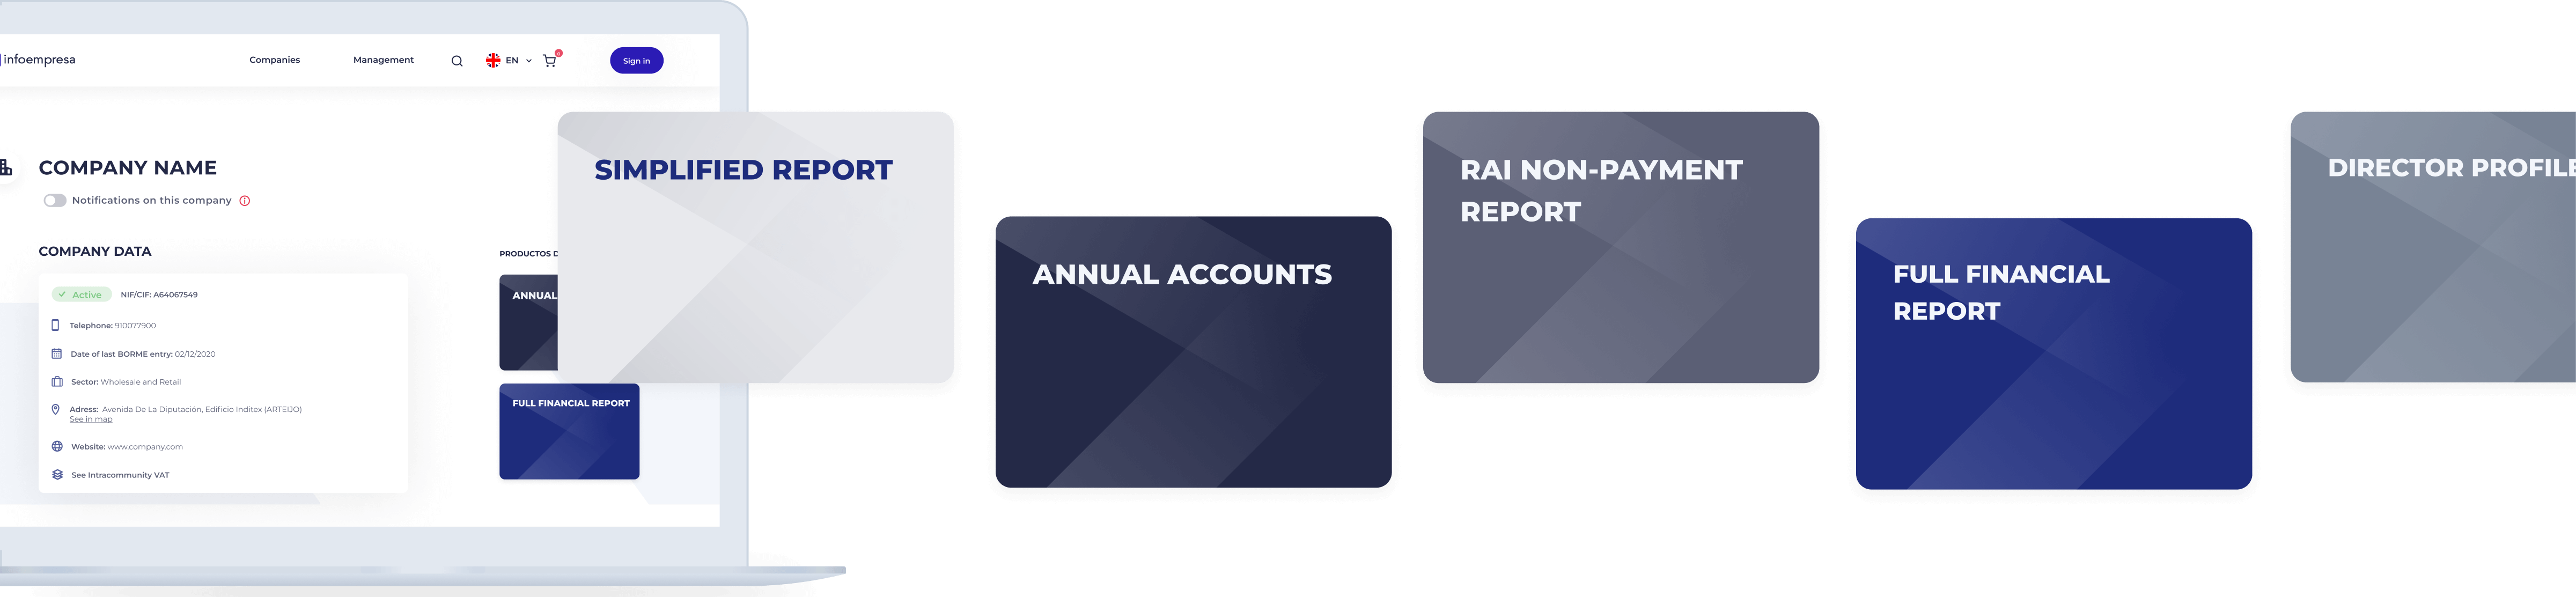 other financial reports